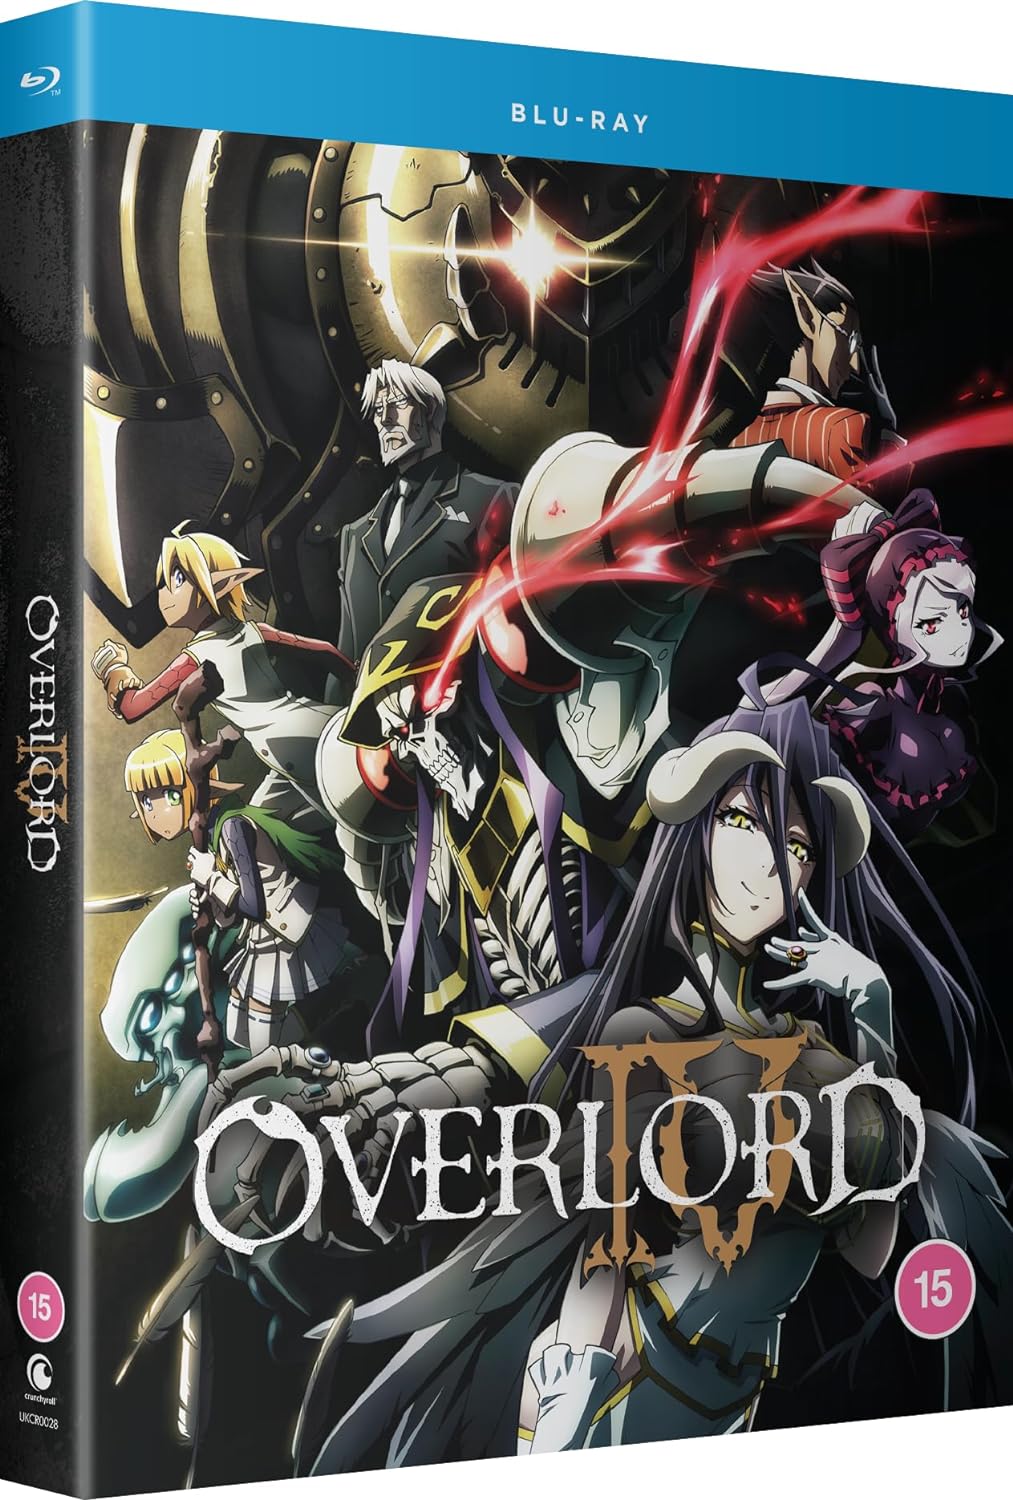 Huge Anime Crossover Announced, Featuring 'Overlord' and More